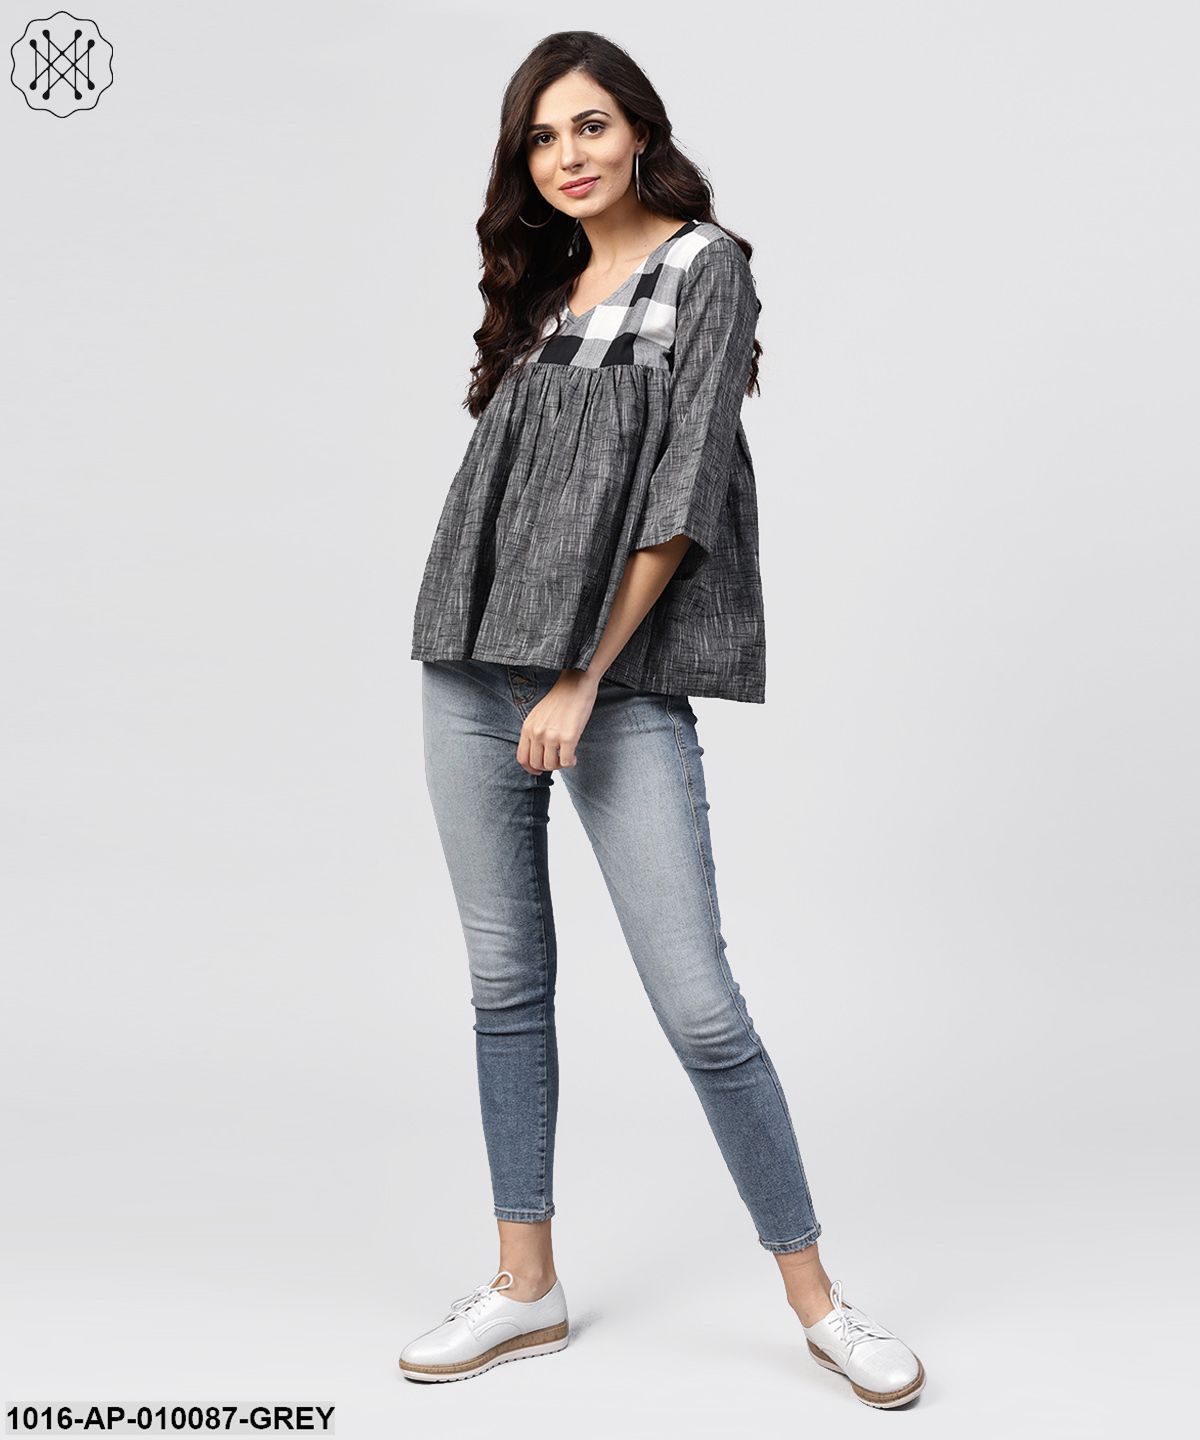 Grey Top With V-Neck And Flared Sleeves